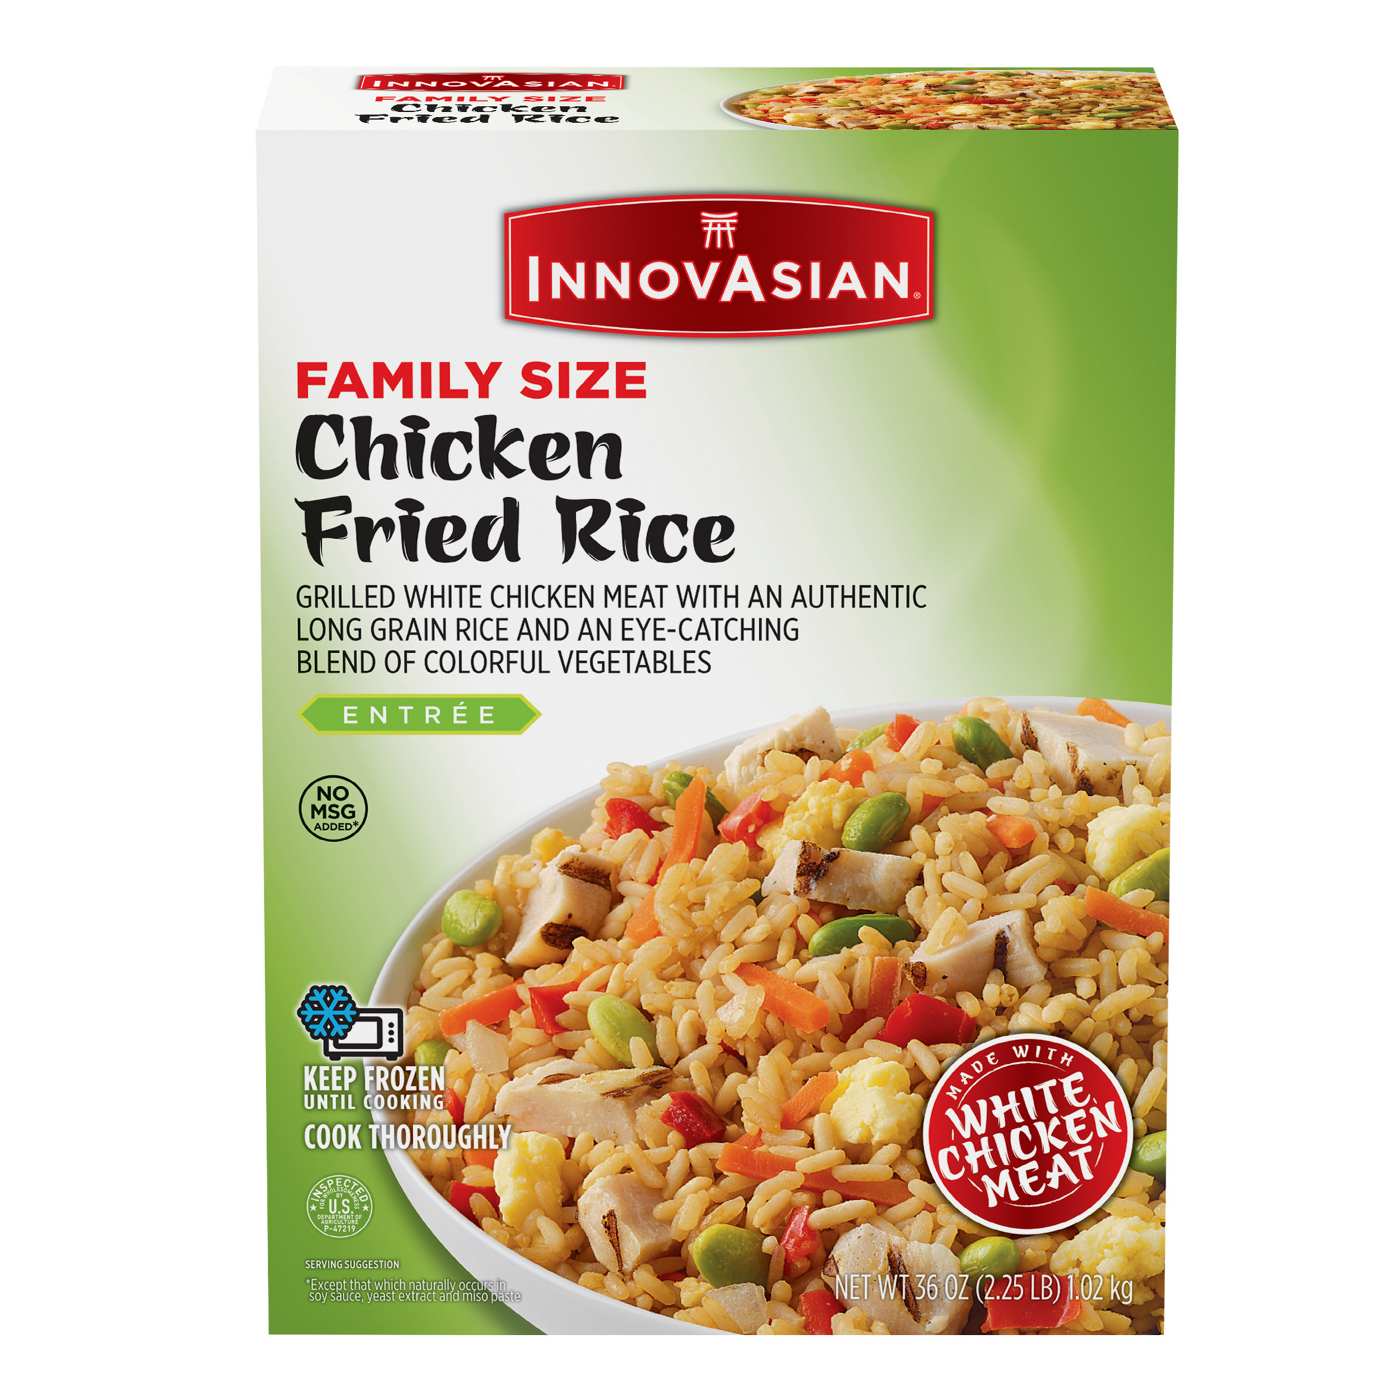 InnovAsian Frozen Chicken Fried Rice - Family-Size; image 1 of 7